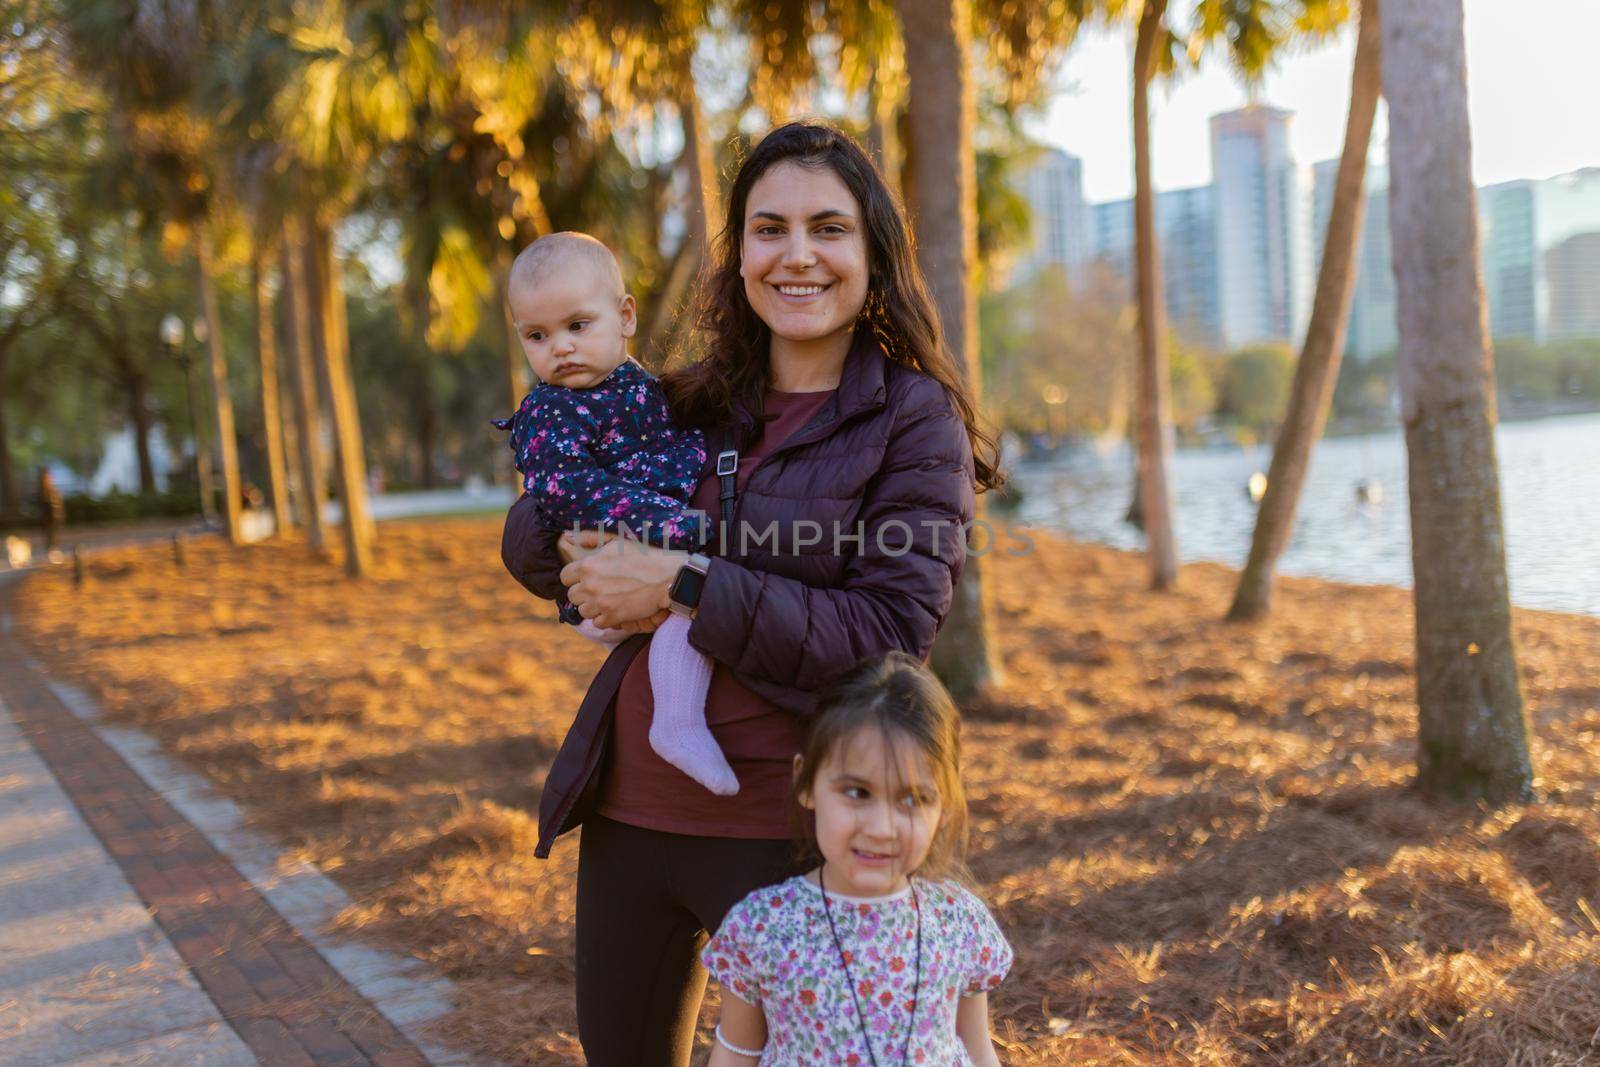 Happy woman with cute young daughters and sunset sunlight as background by Kanelbulle